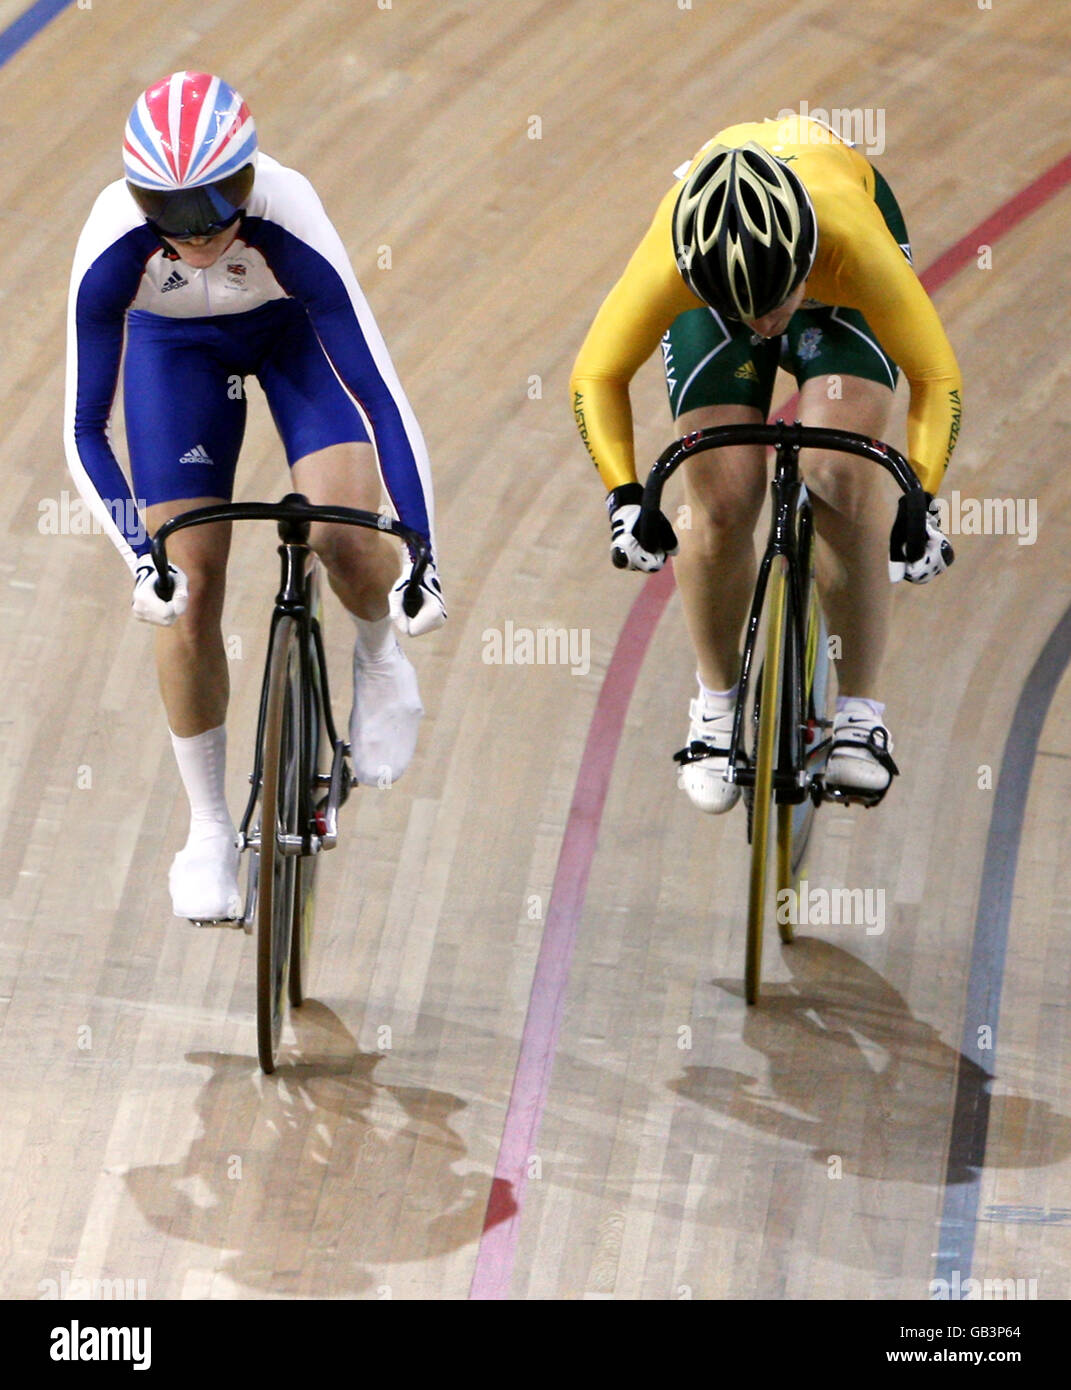 Great Britain's Victoria Pendleton (left) pedals for gold alongside Australia's Anna Meares during the Women's Sprint Final at the Laoshan Velodrome during the 2008 Beijing Olympic Games in China. Stock Photo